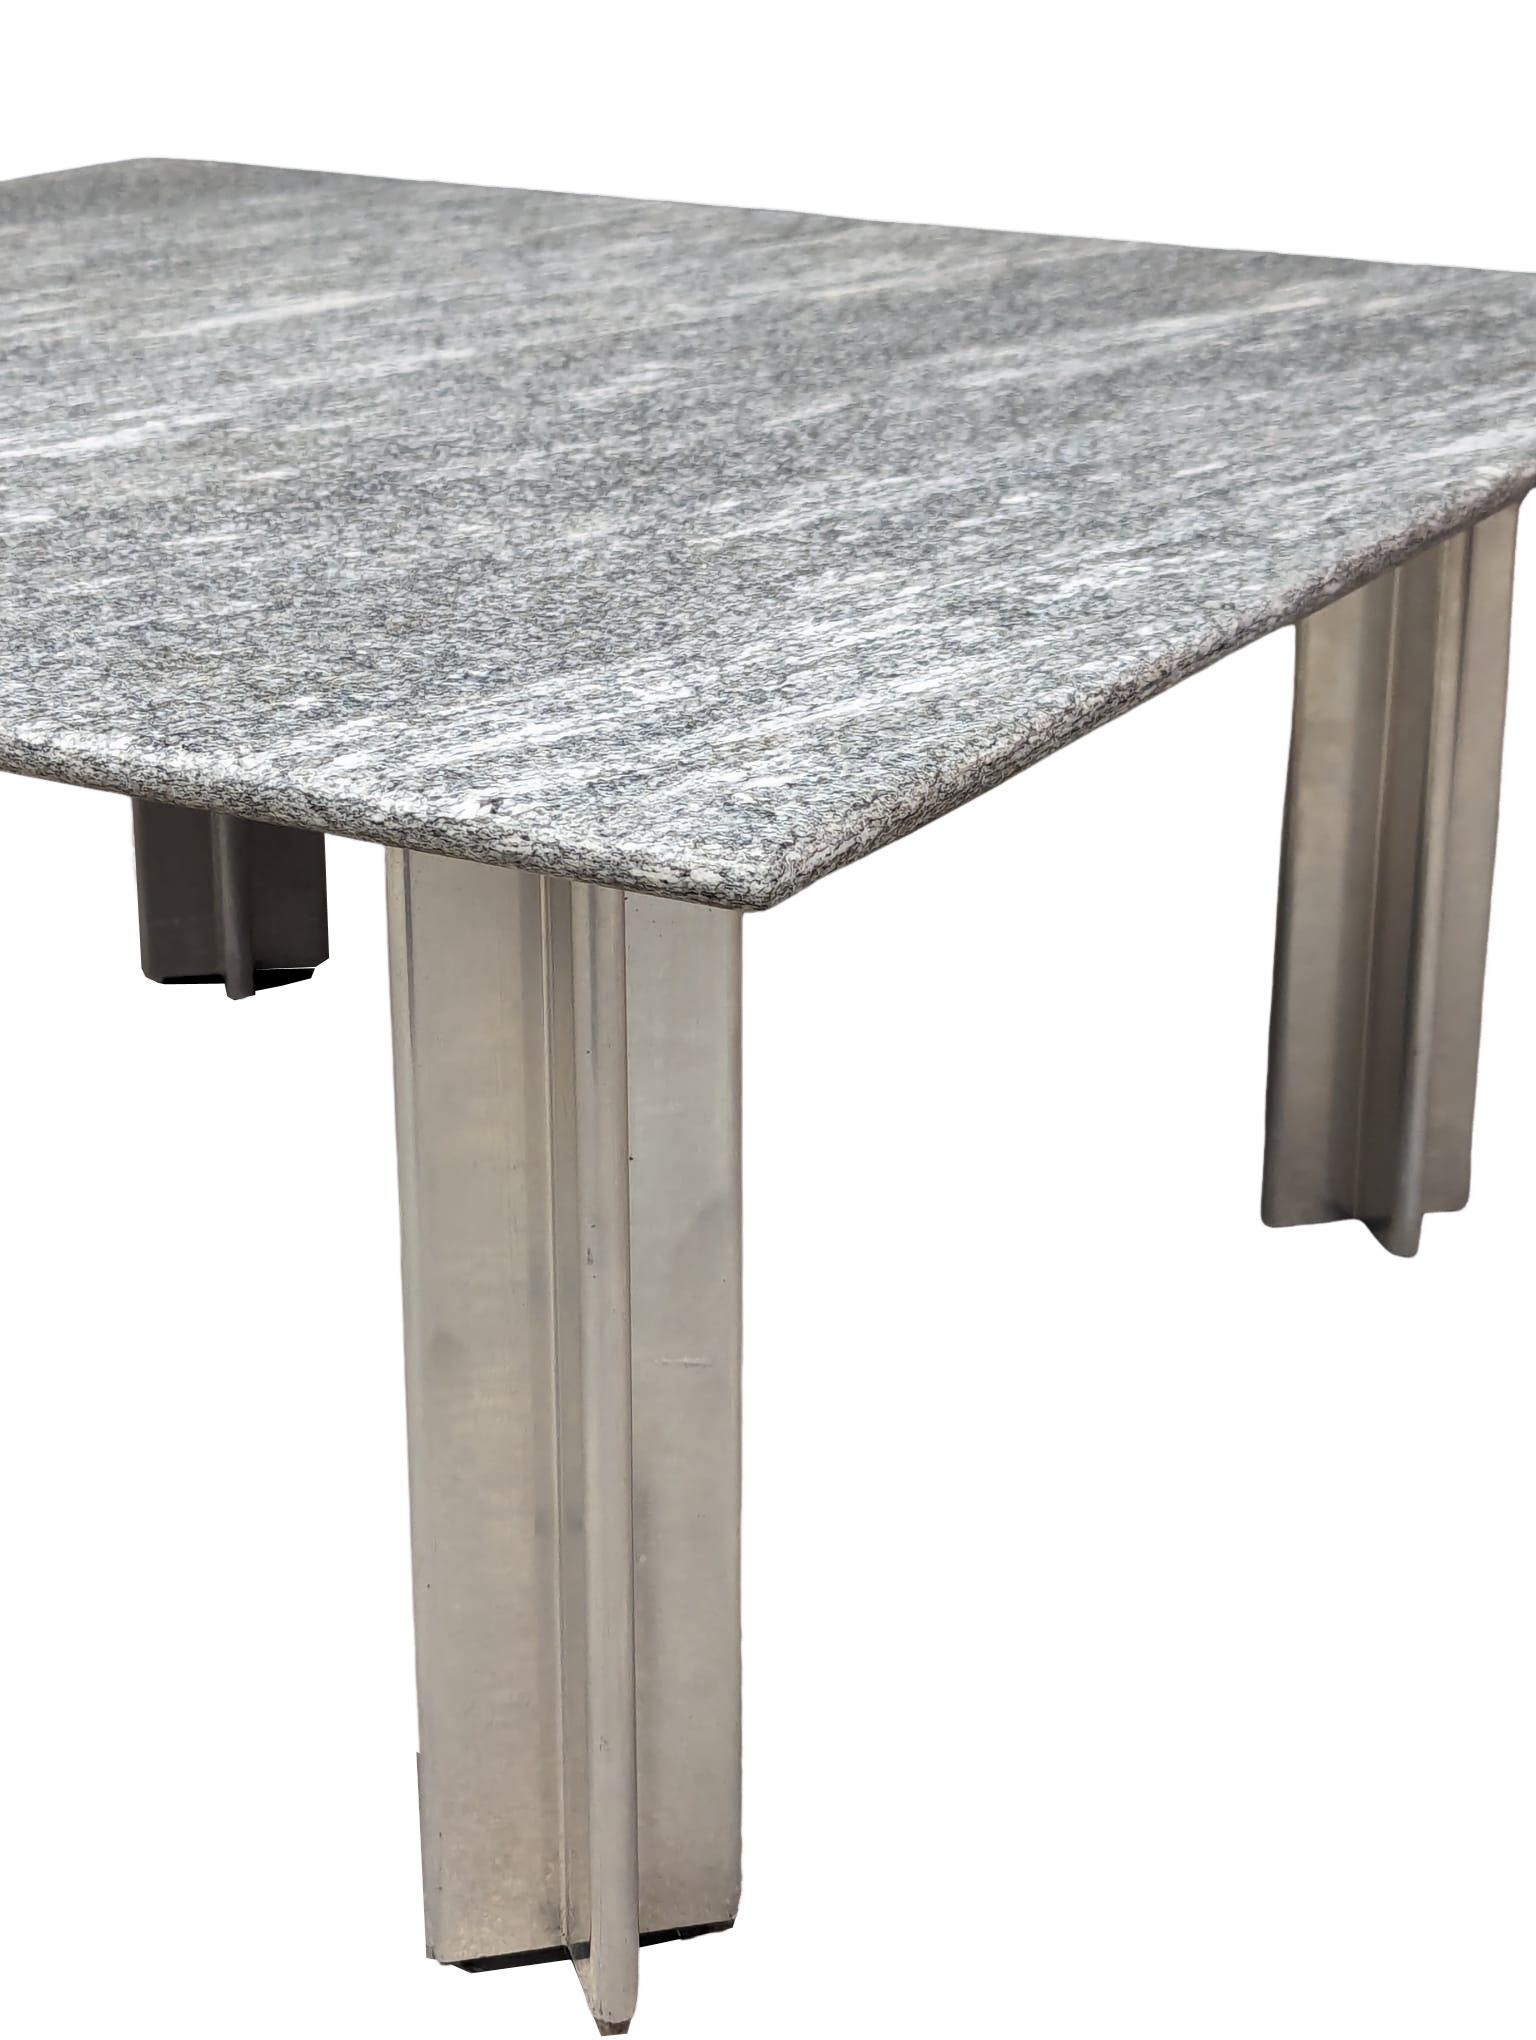 A Zanotta granite top coffee table on alloy supports, 90cm x 90cm x 41cm - Image 2 of 4